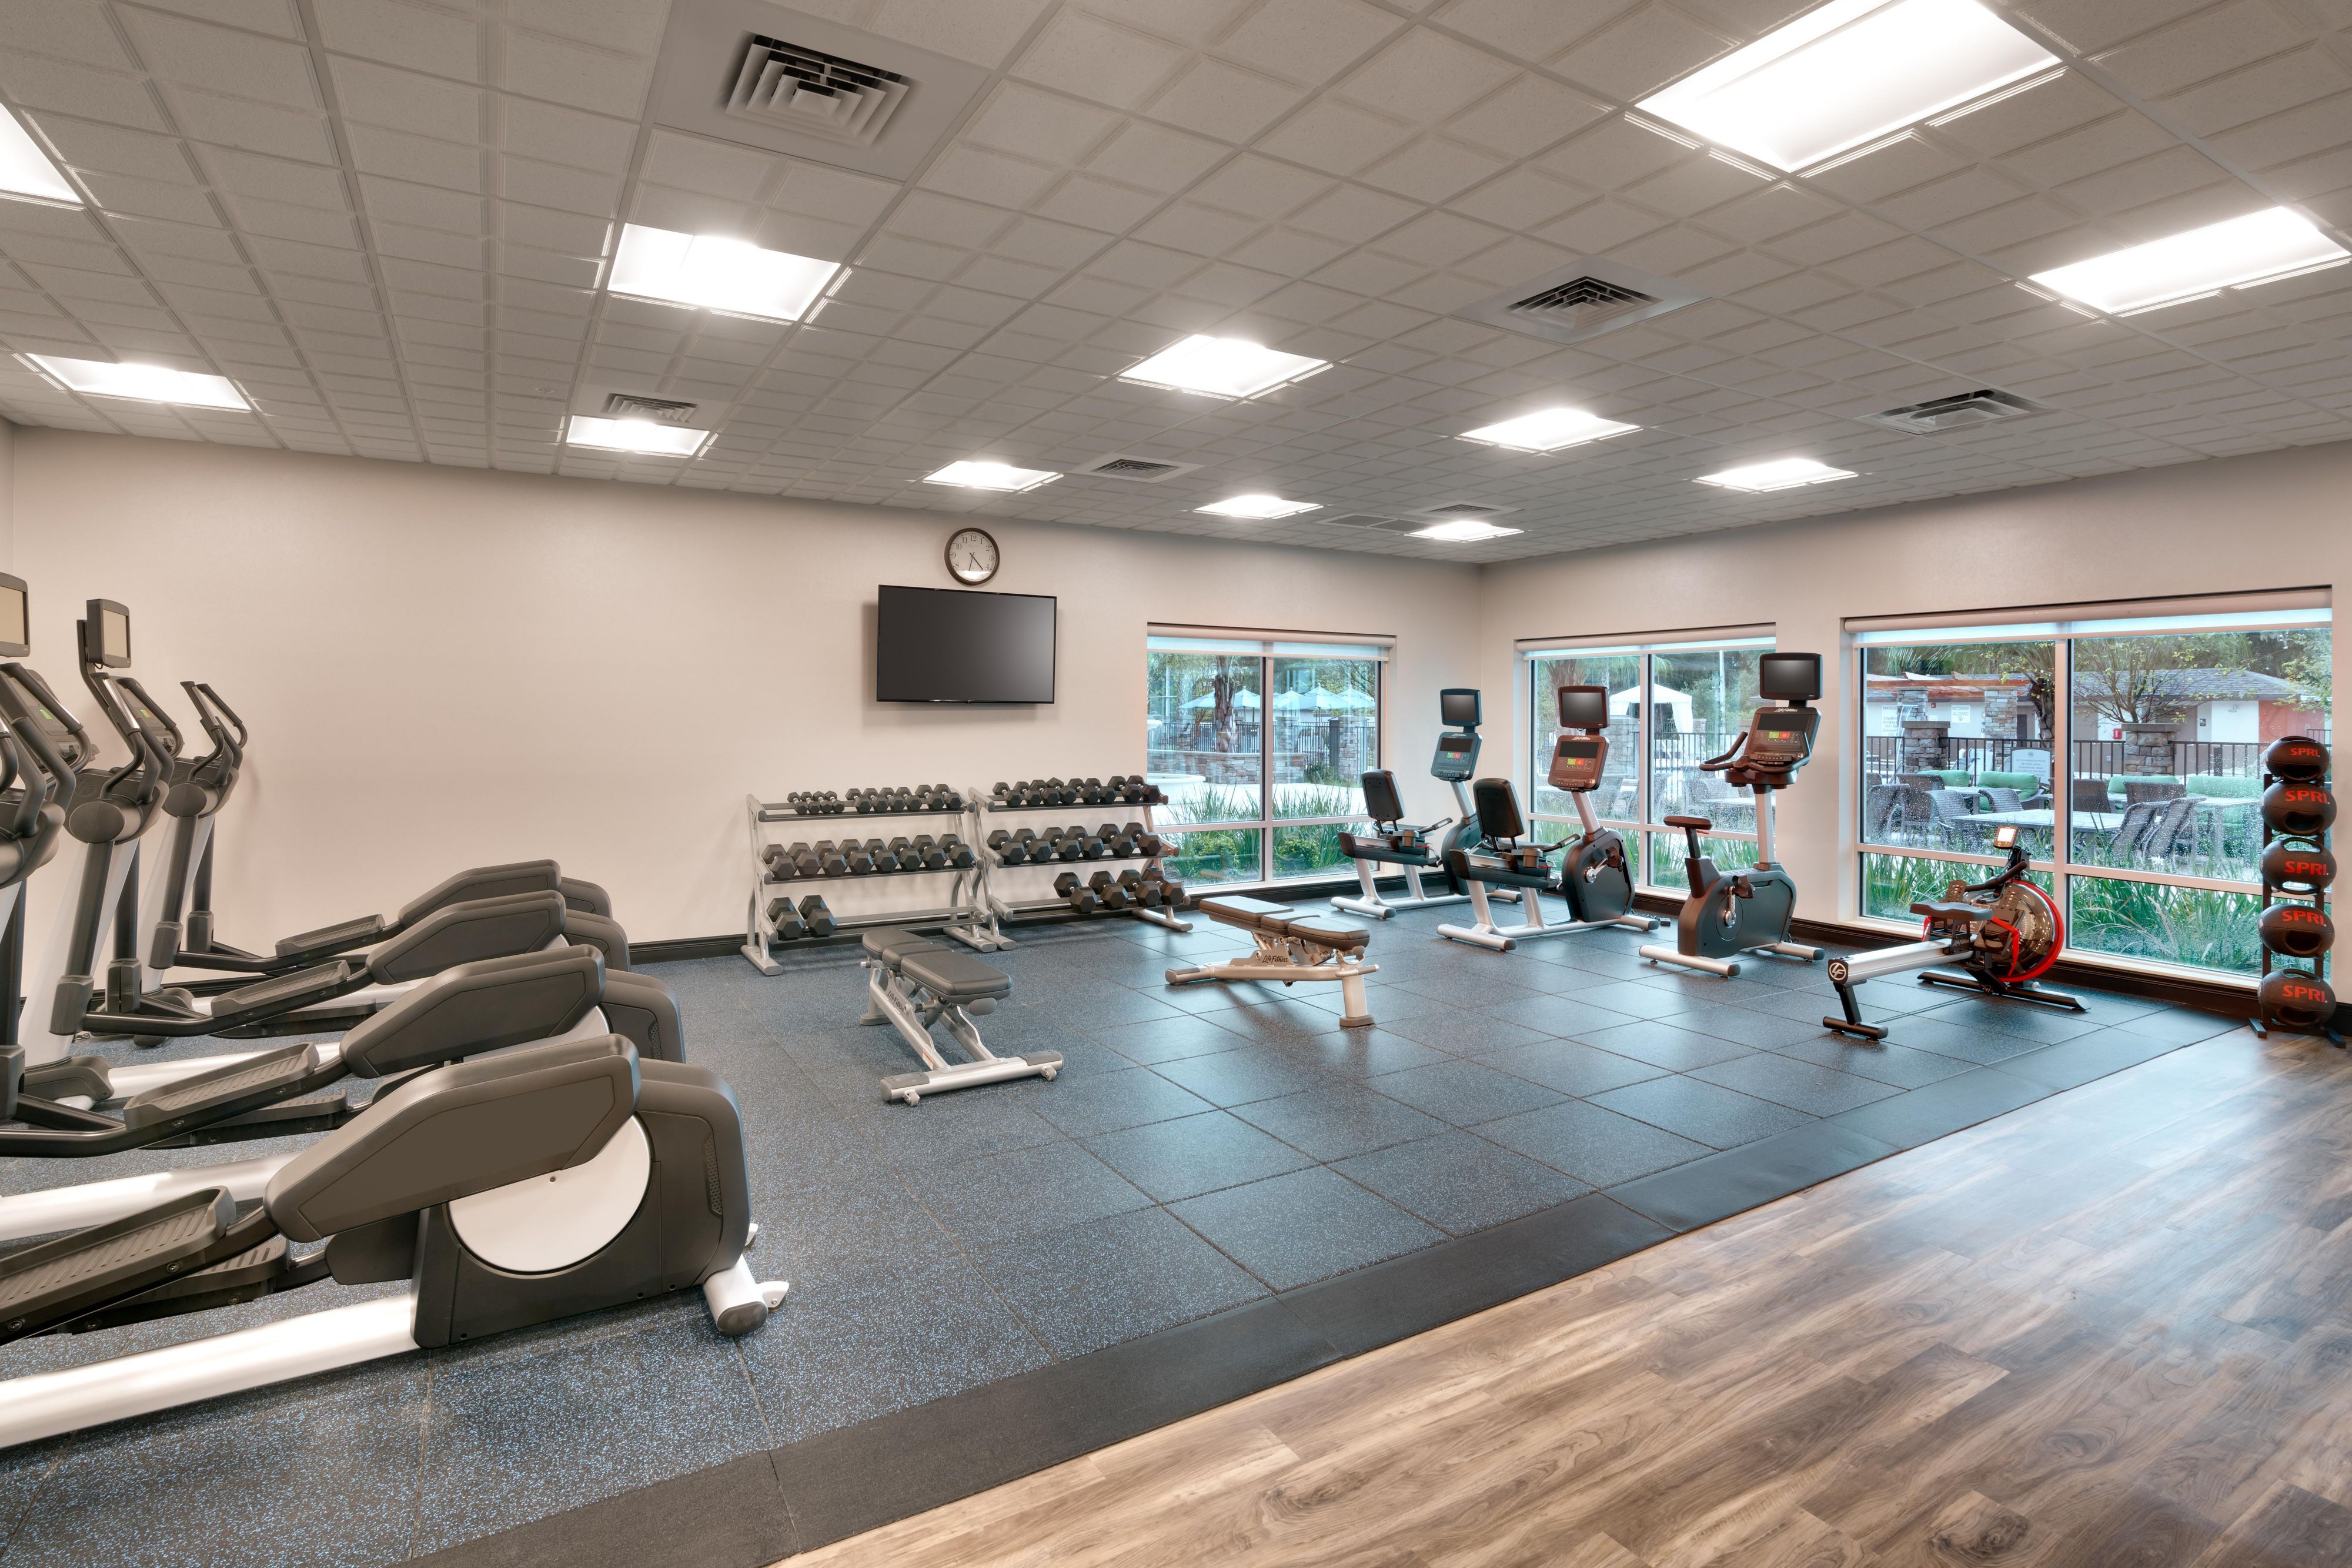 Our large fitness center has all you need to stay fit while you travel. It even comes with a view.